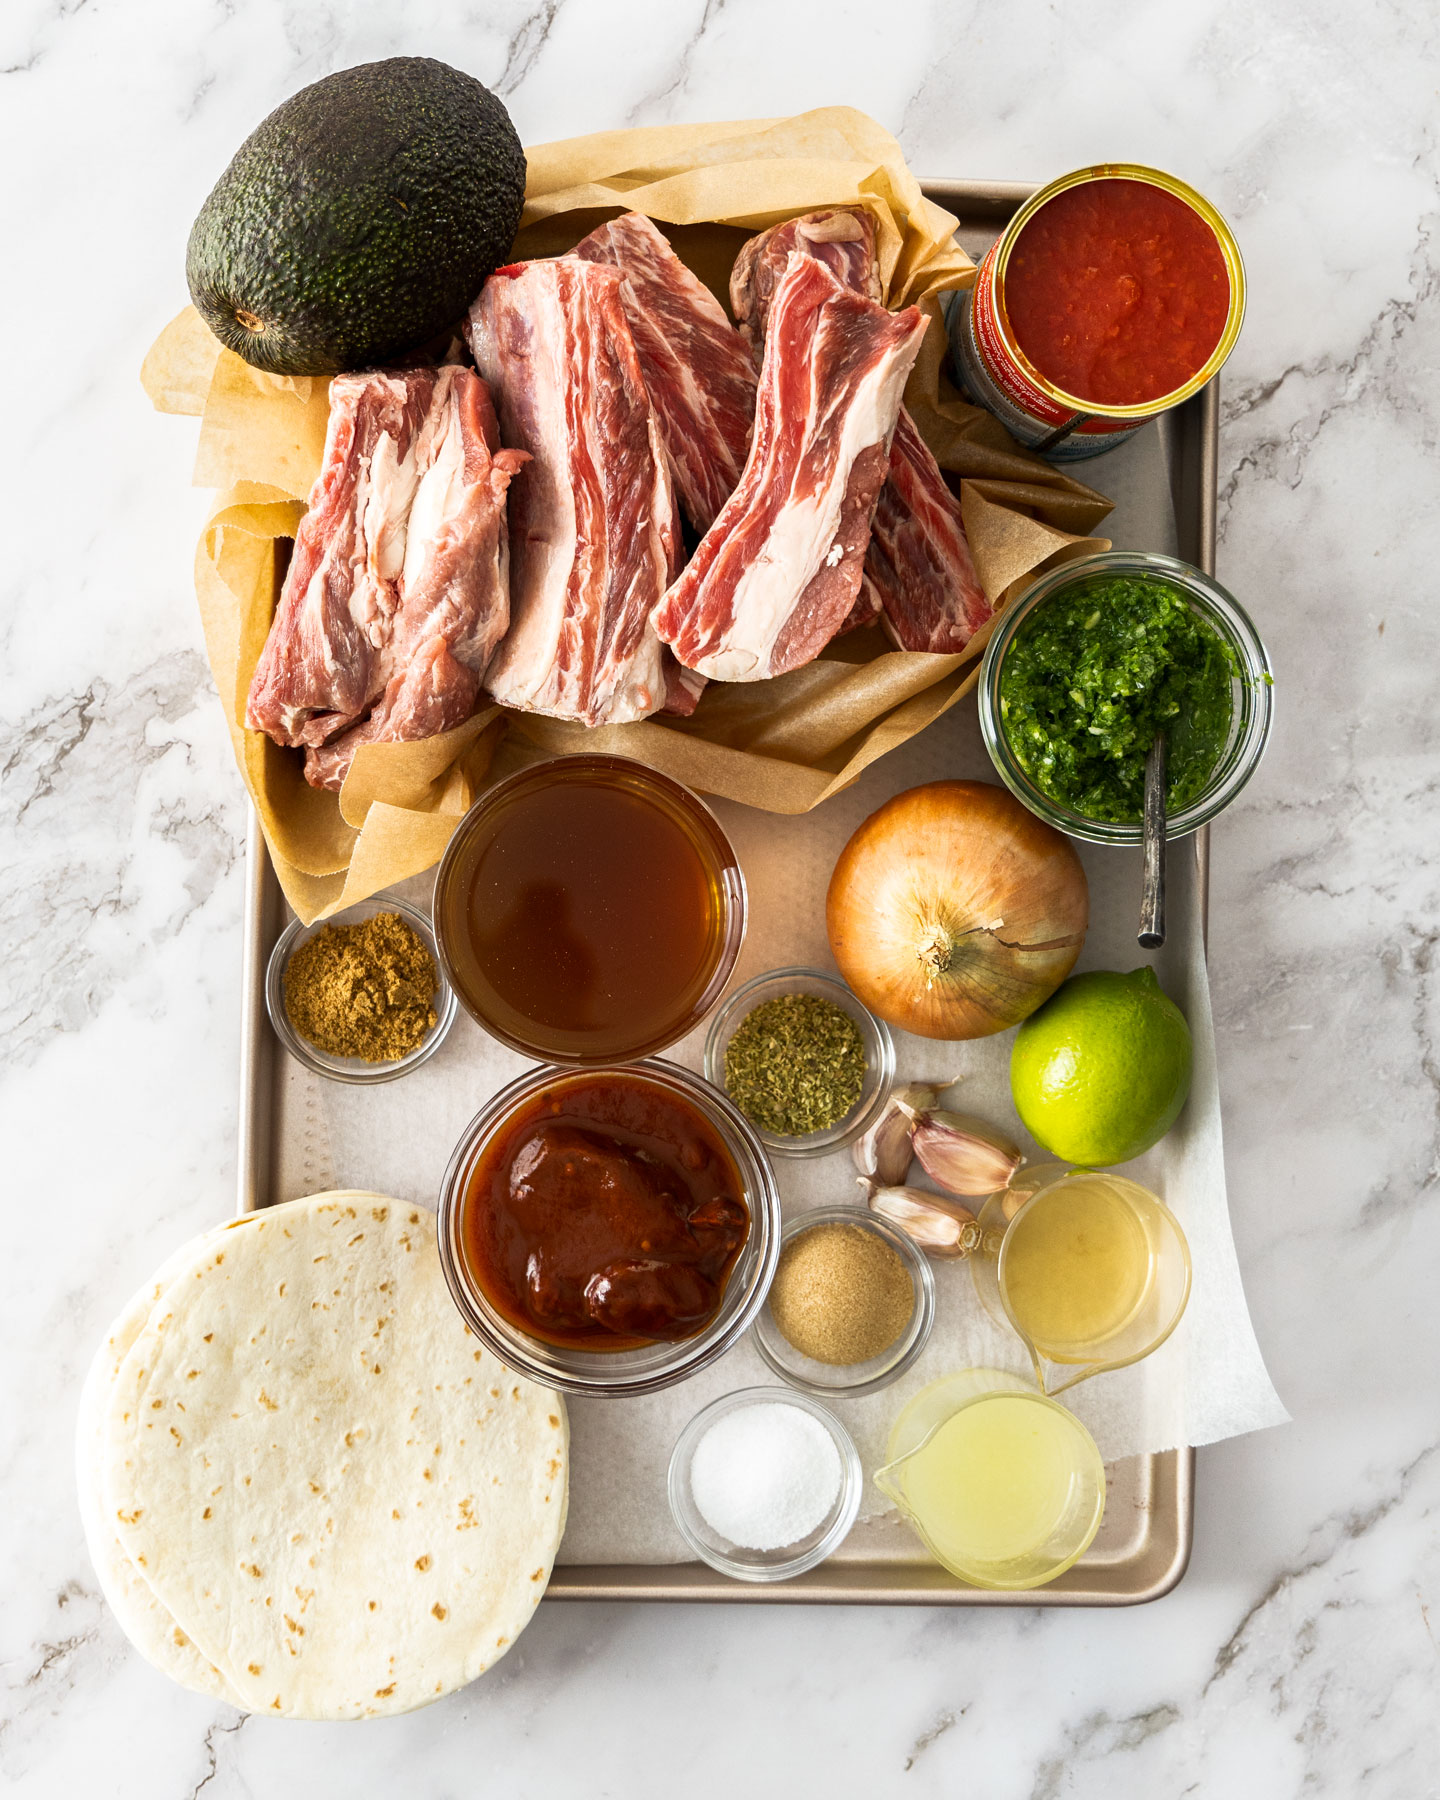 Ingredients for short rib tacos on a baking tray.